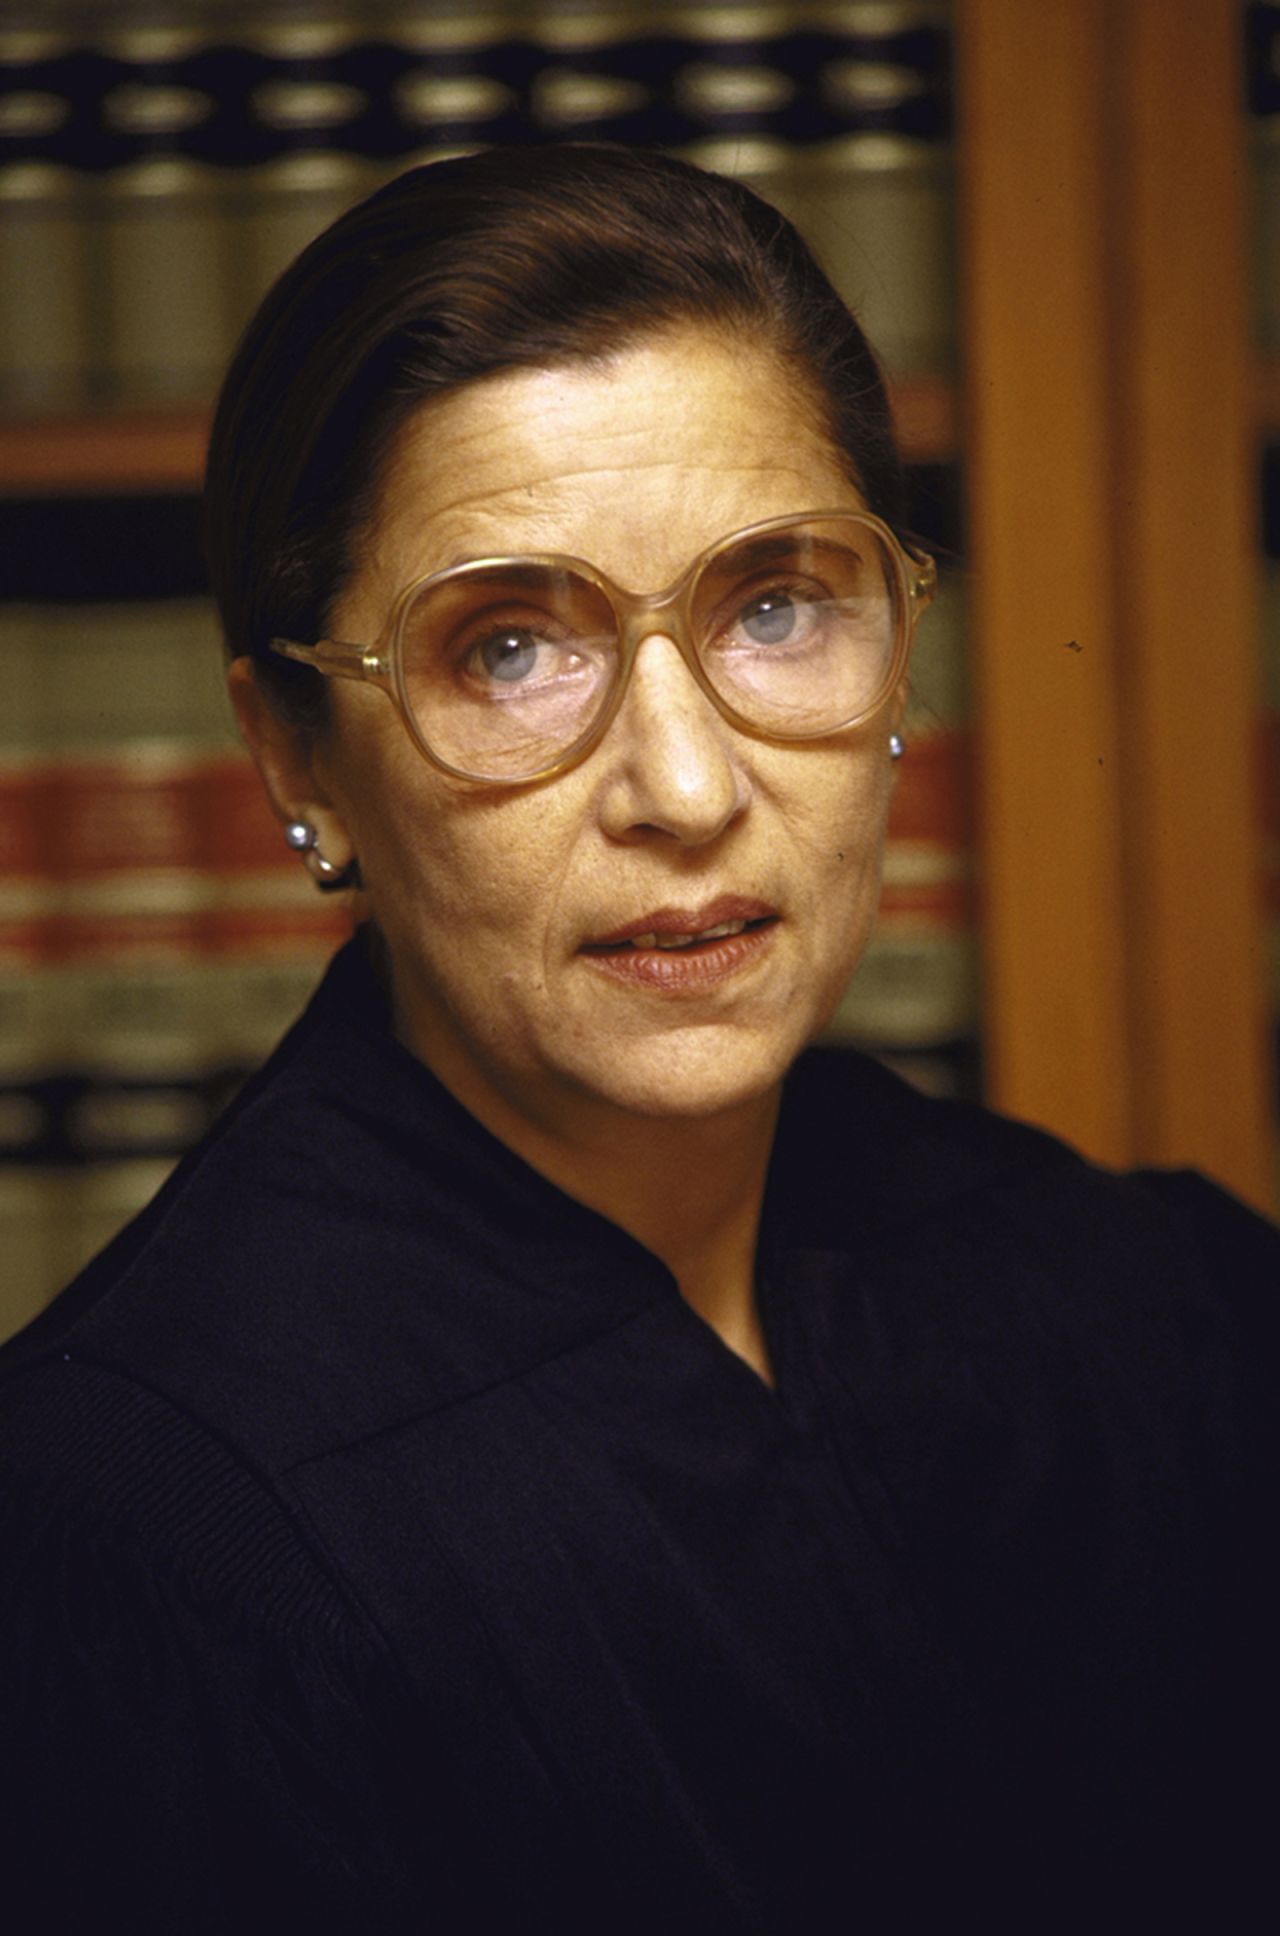 Ginsburg in her chambers at the US Courthouse in Washington.